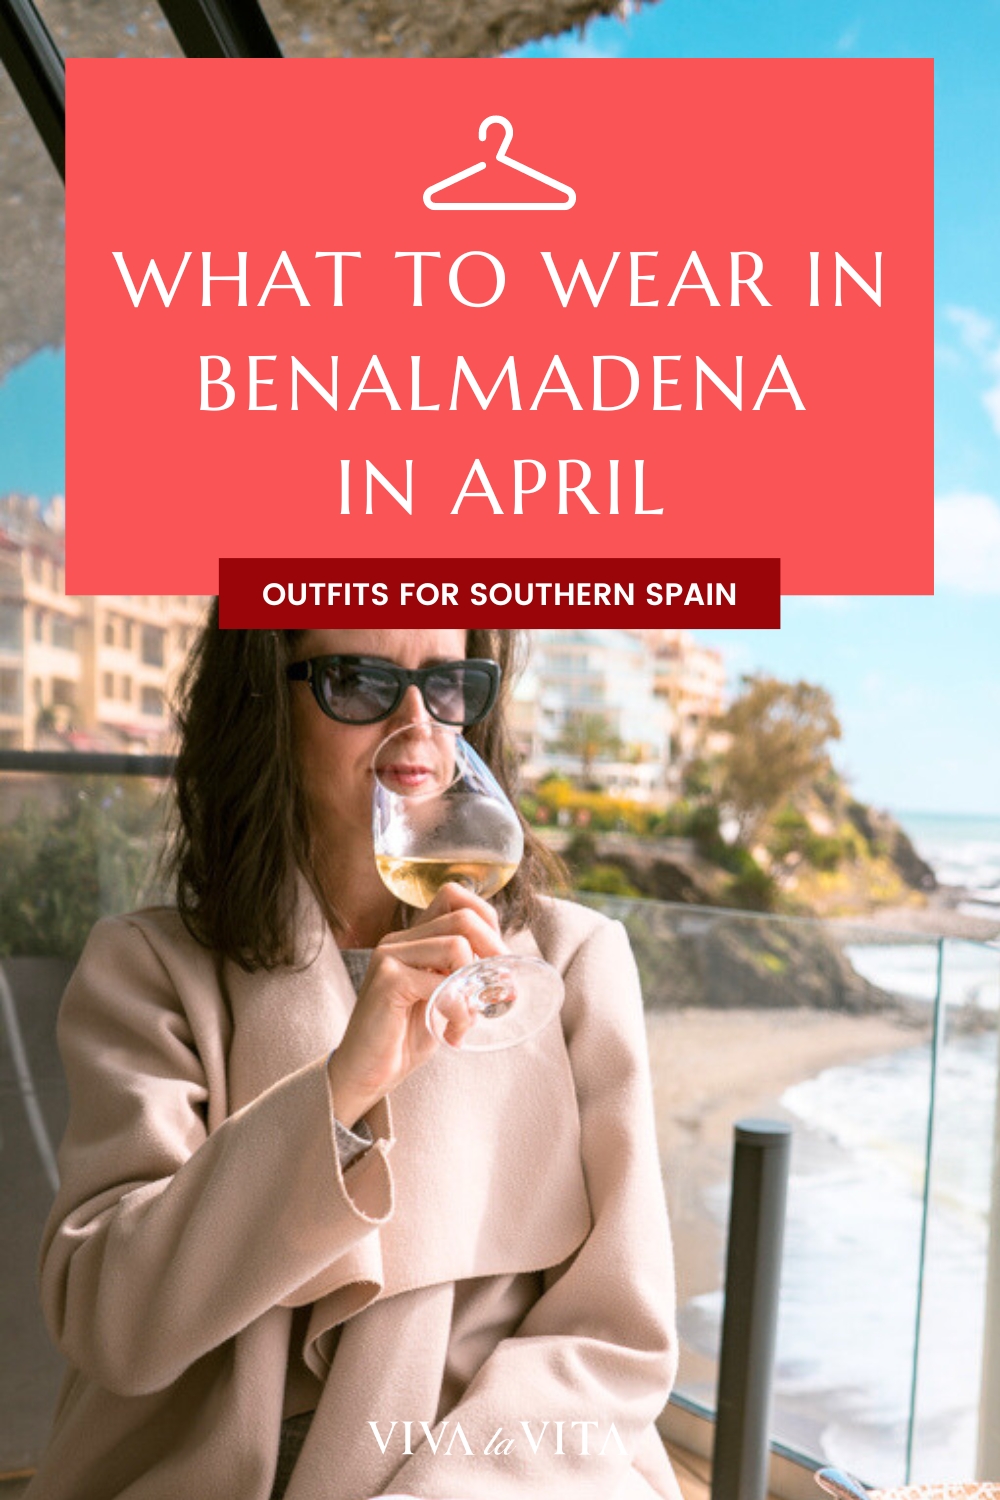 Pinterest image showing a woman drinking wine with a warm coat in a restaurant, with a headline: what to wear in Benalmadena in April - outfits for Southern Spain